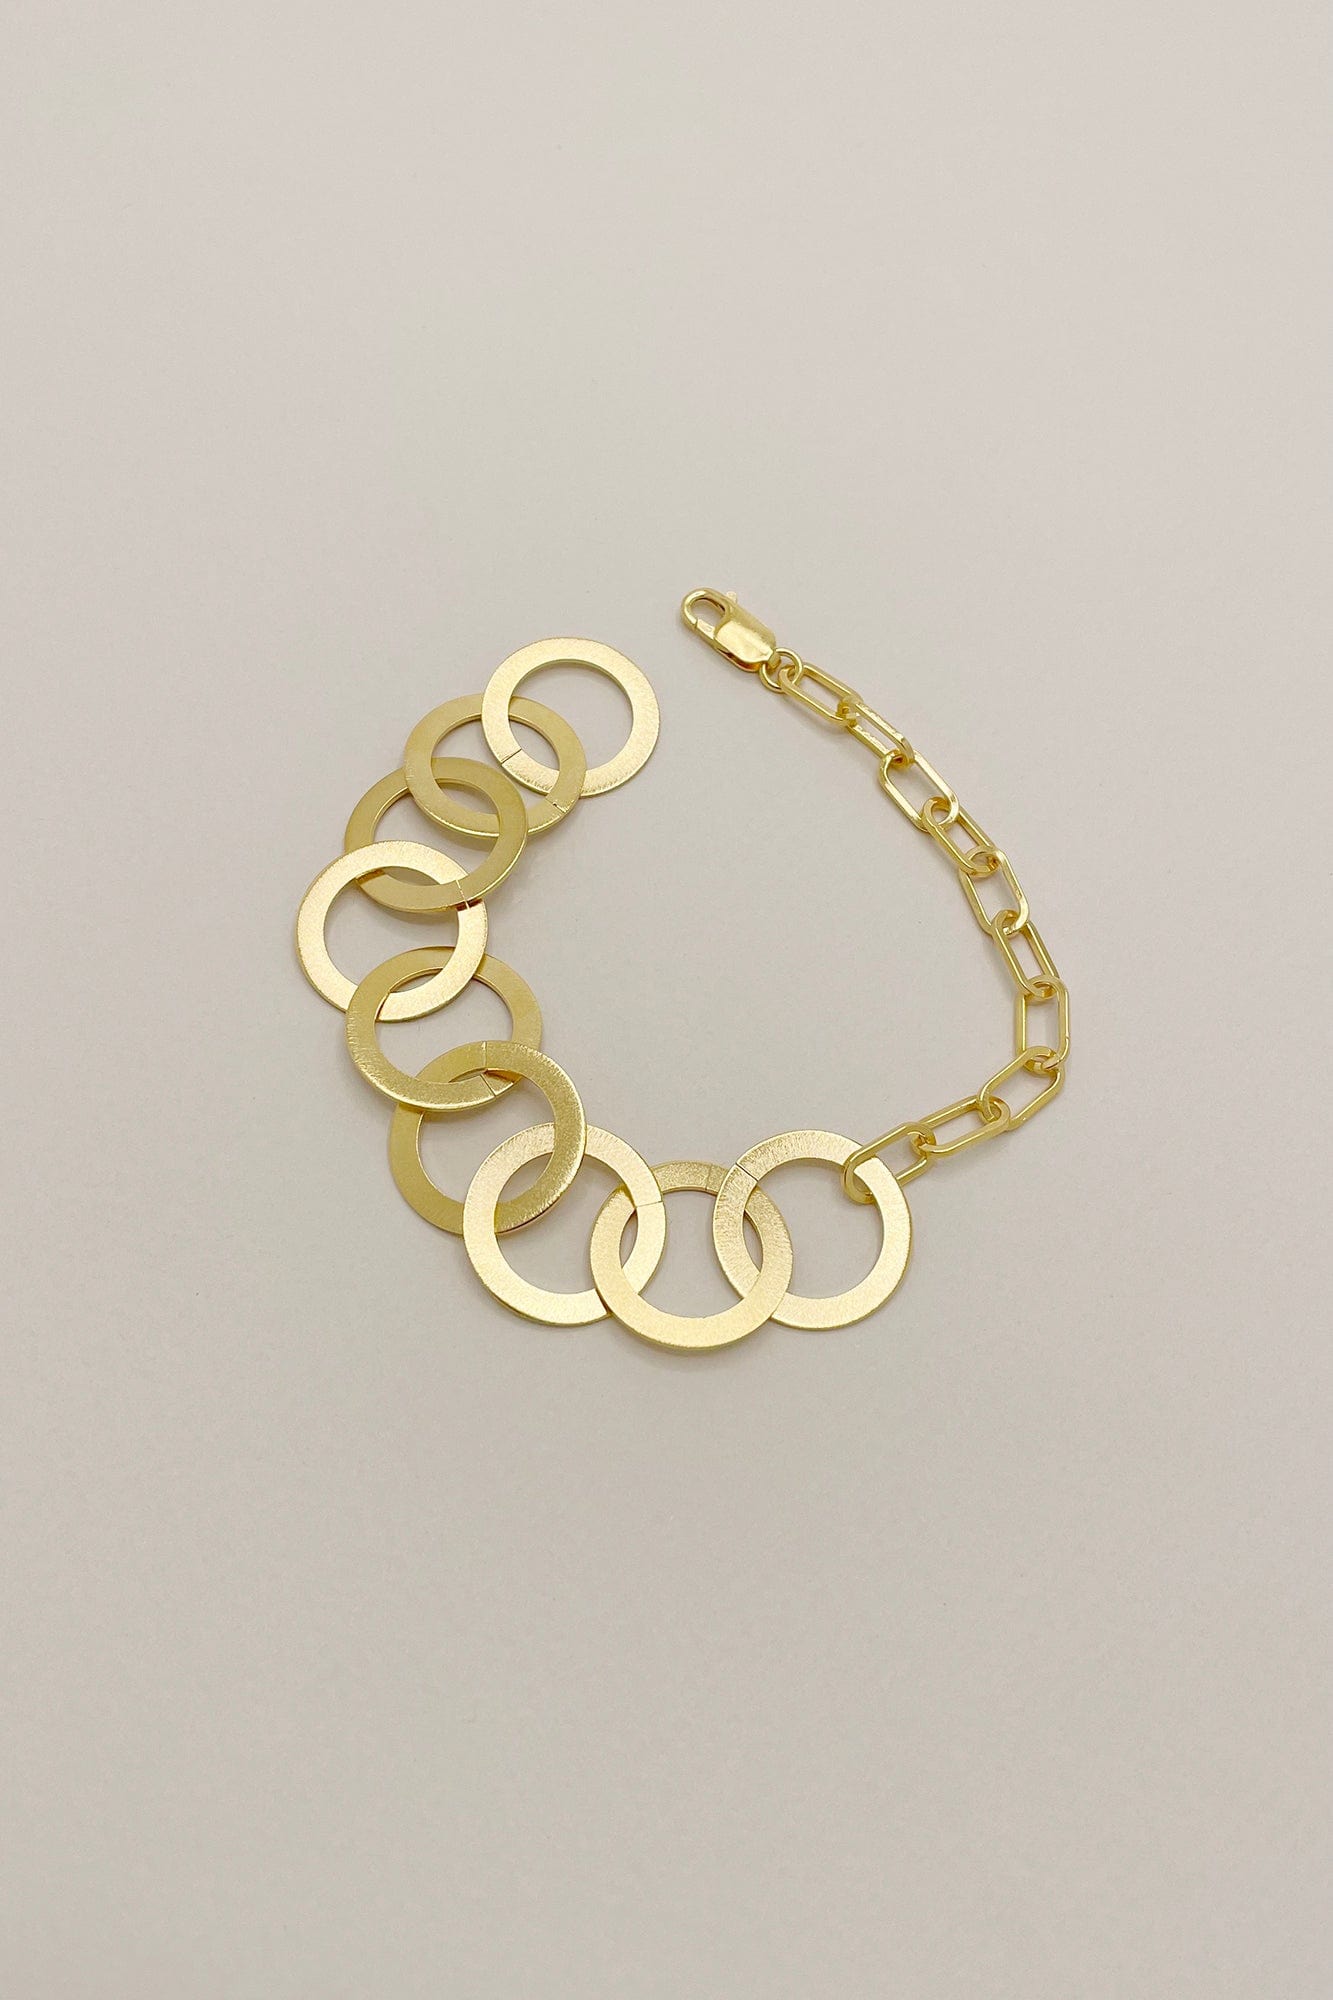 Circle Link Chain Bracelet - Gold Plated AR.M ANNA ROSA MOSCHOUTI